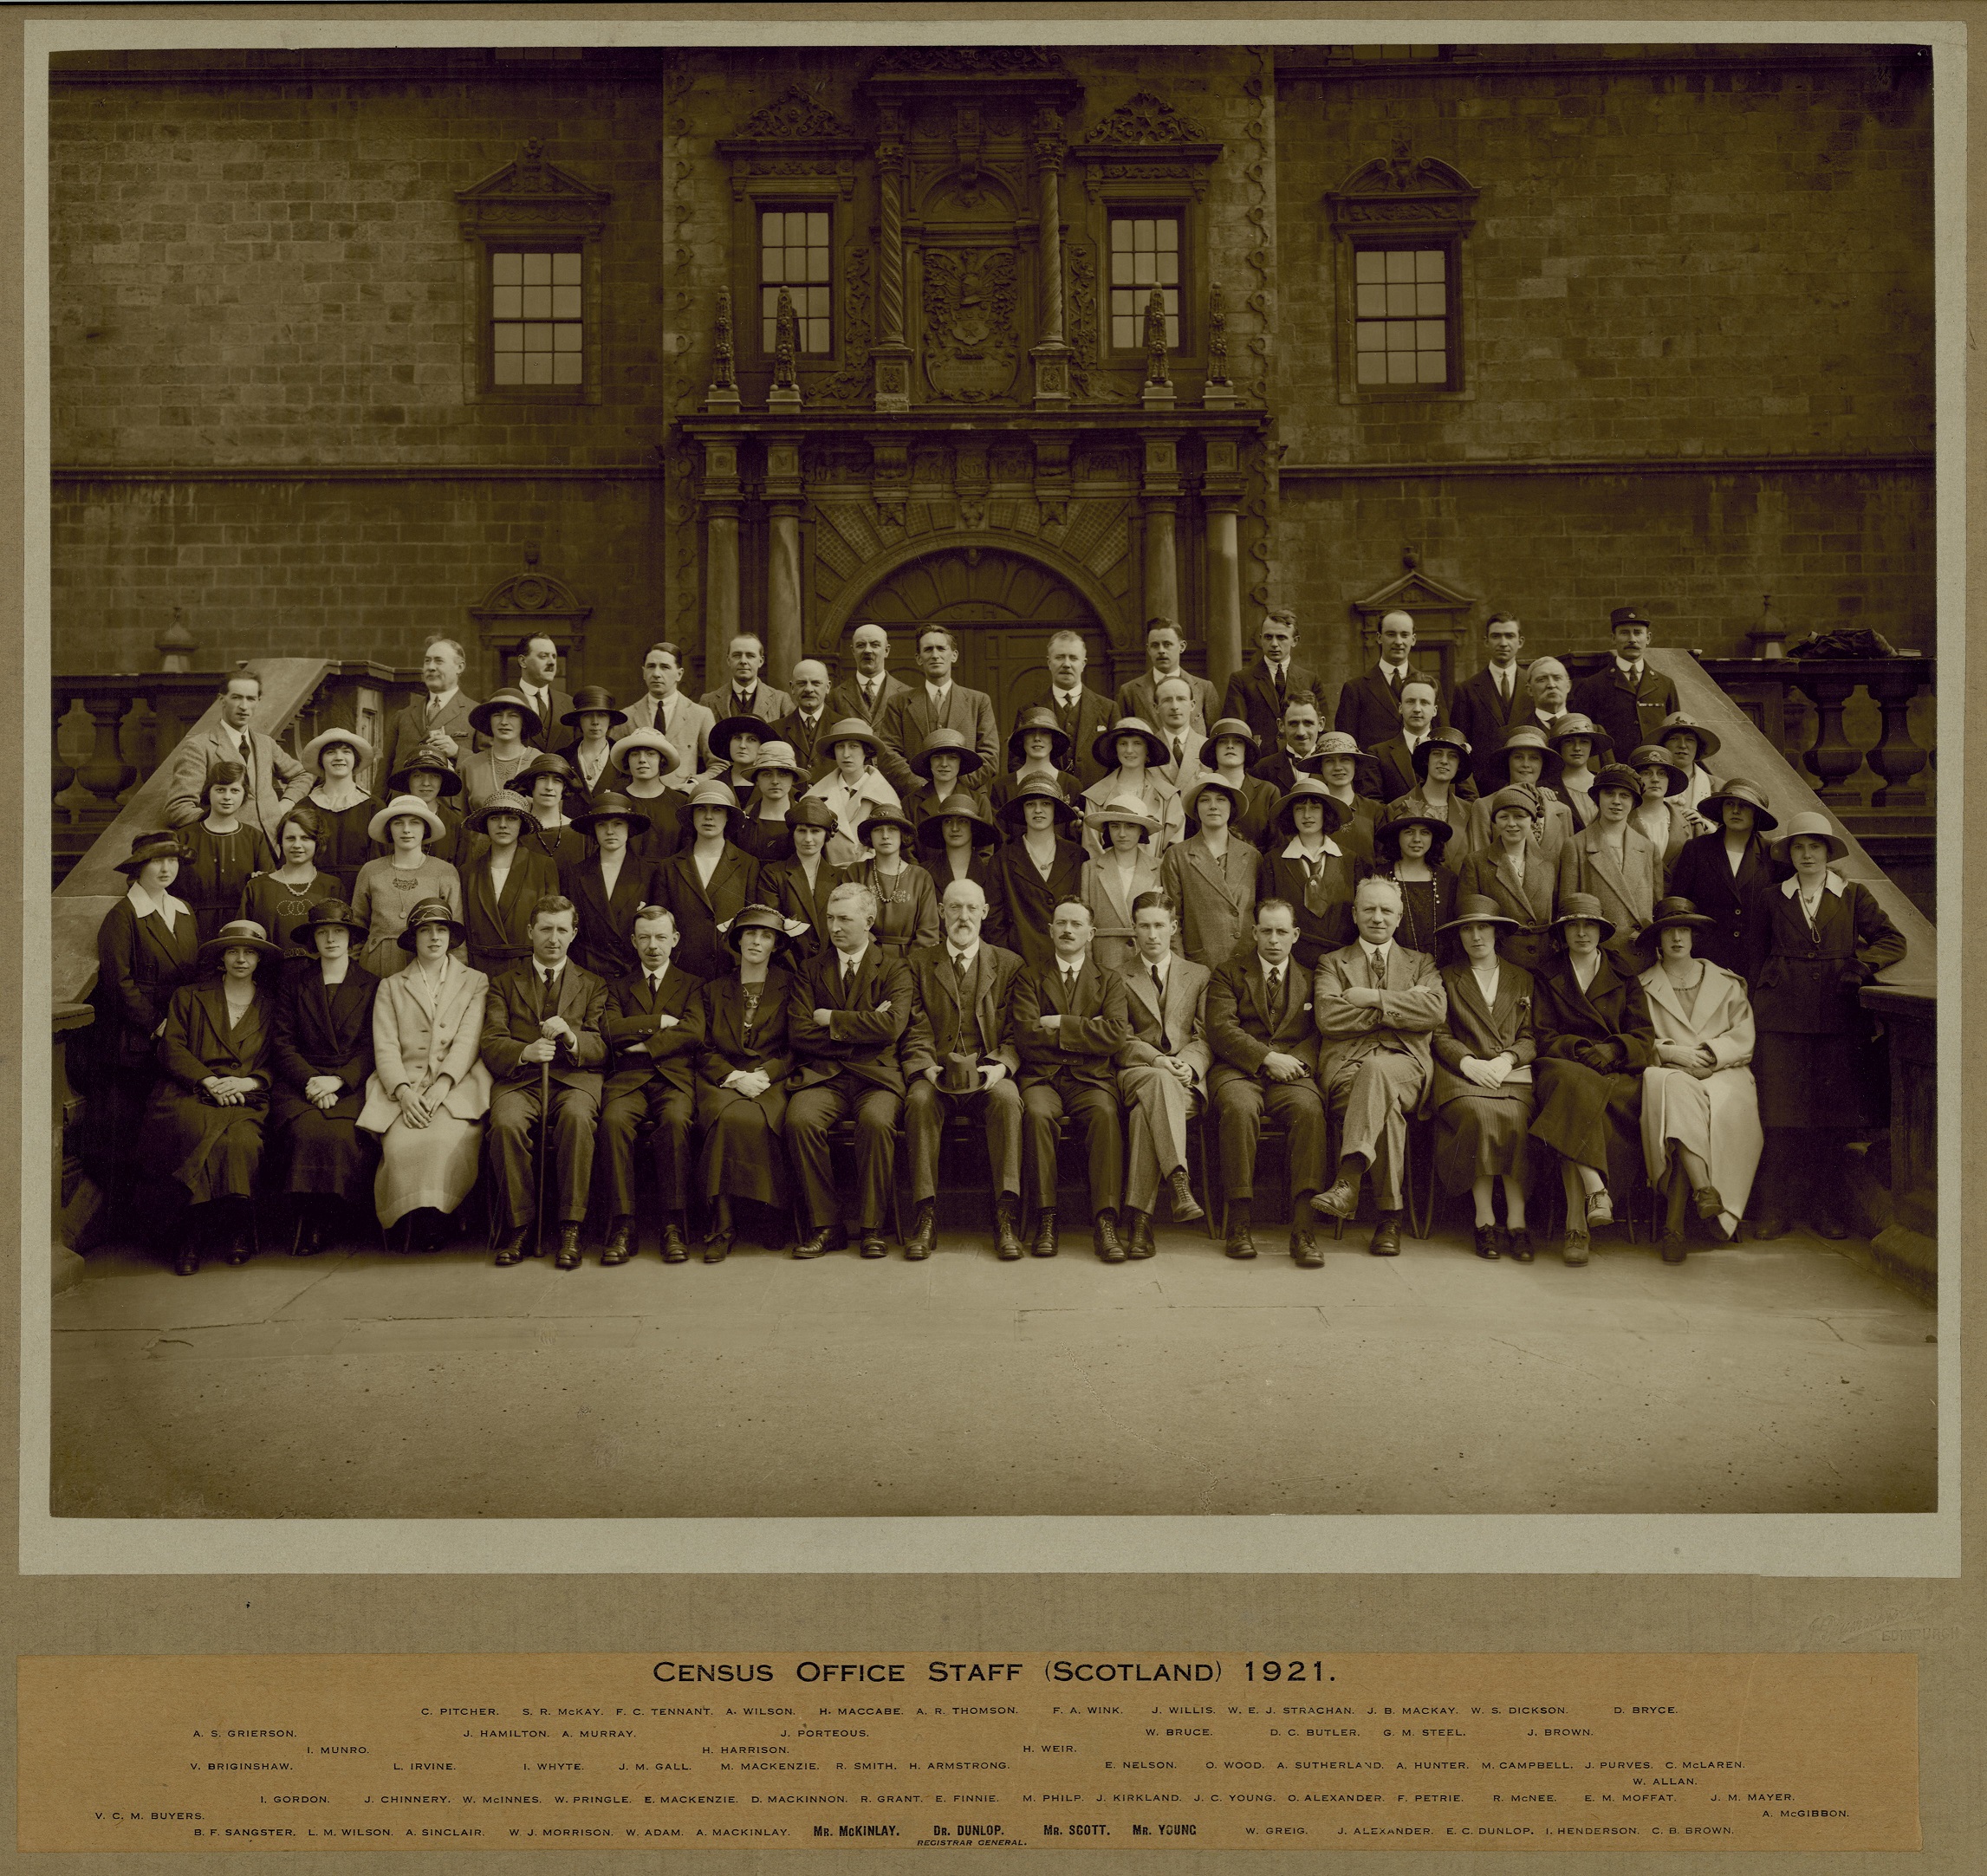 Group photograph including men and women on steps. The staff of the 1921 Scottish Census Office